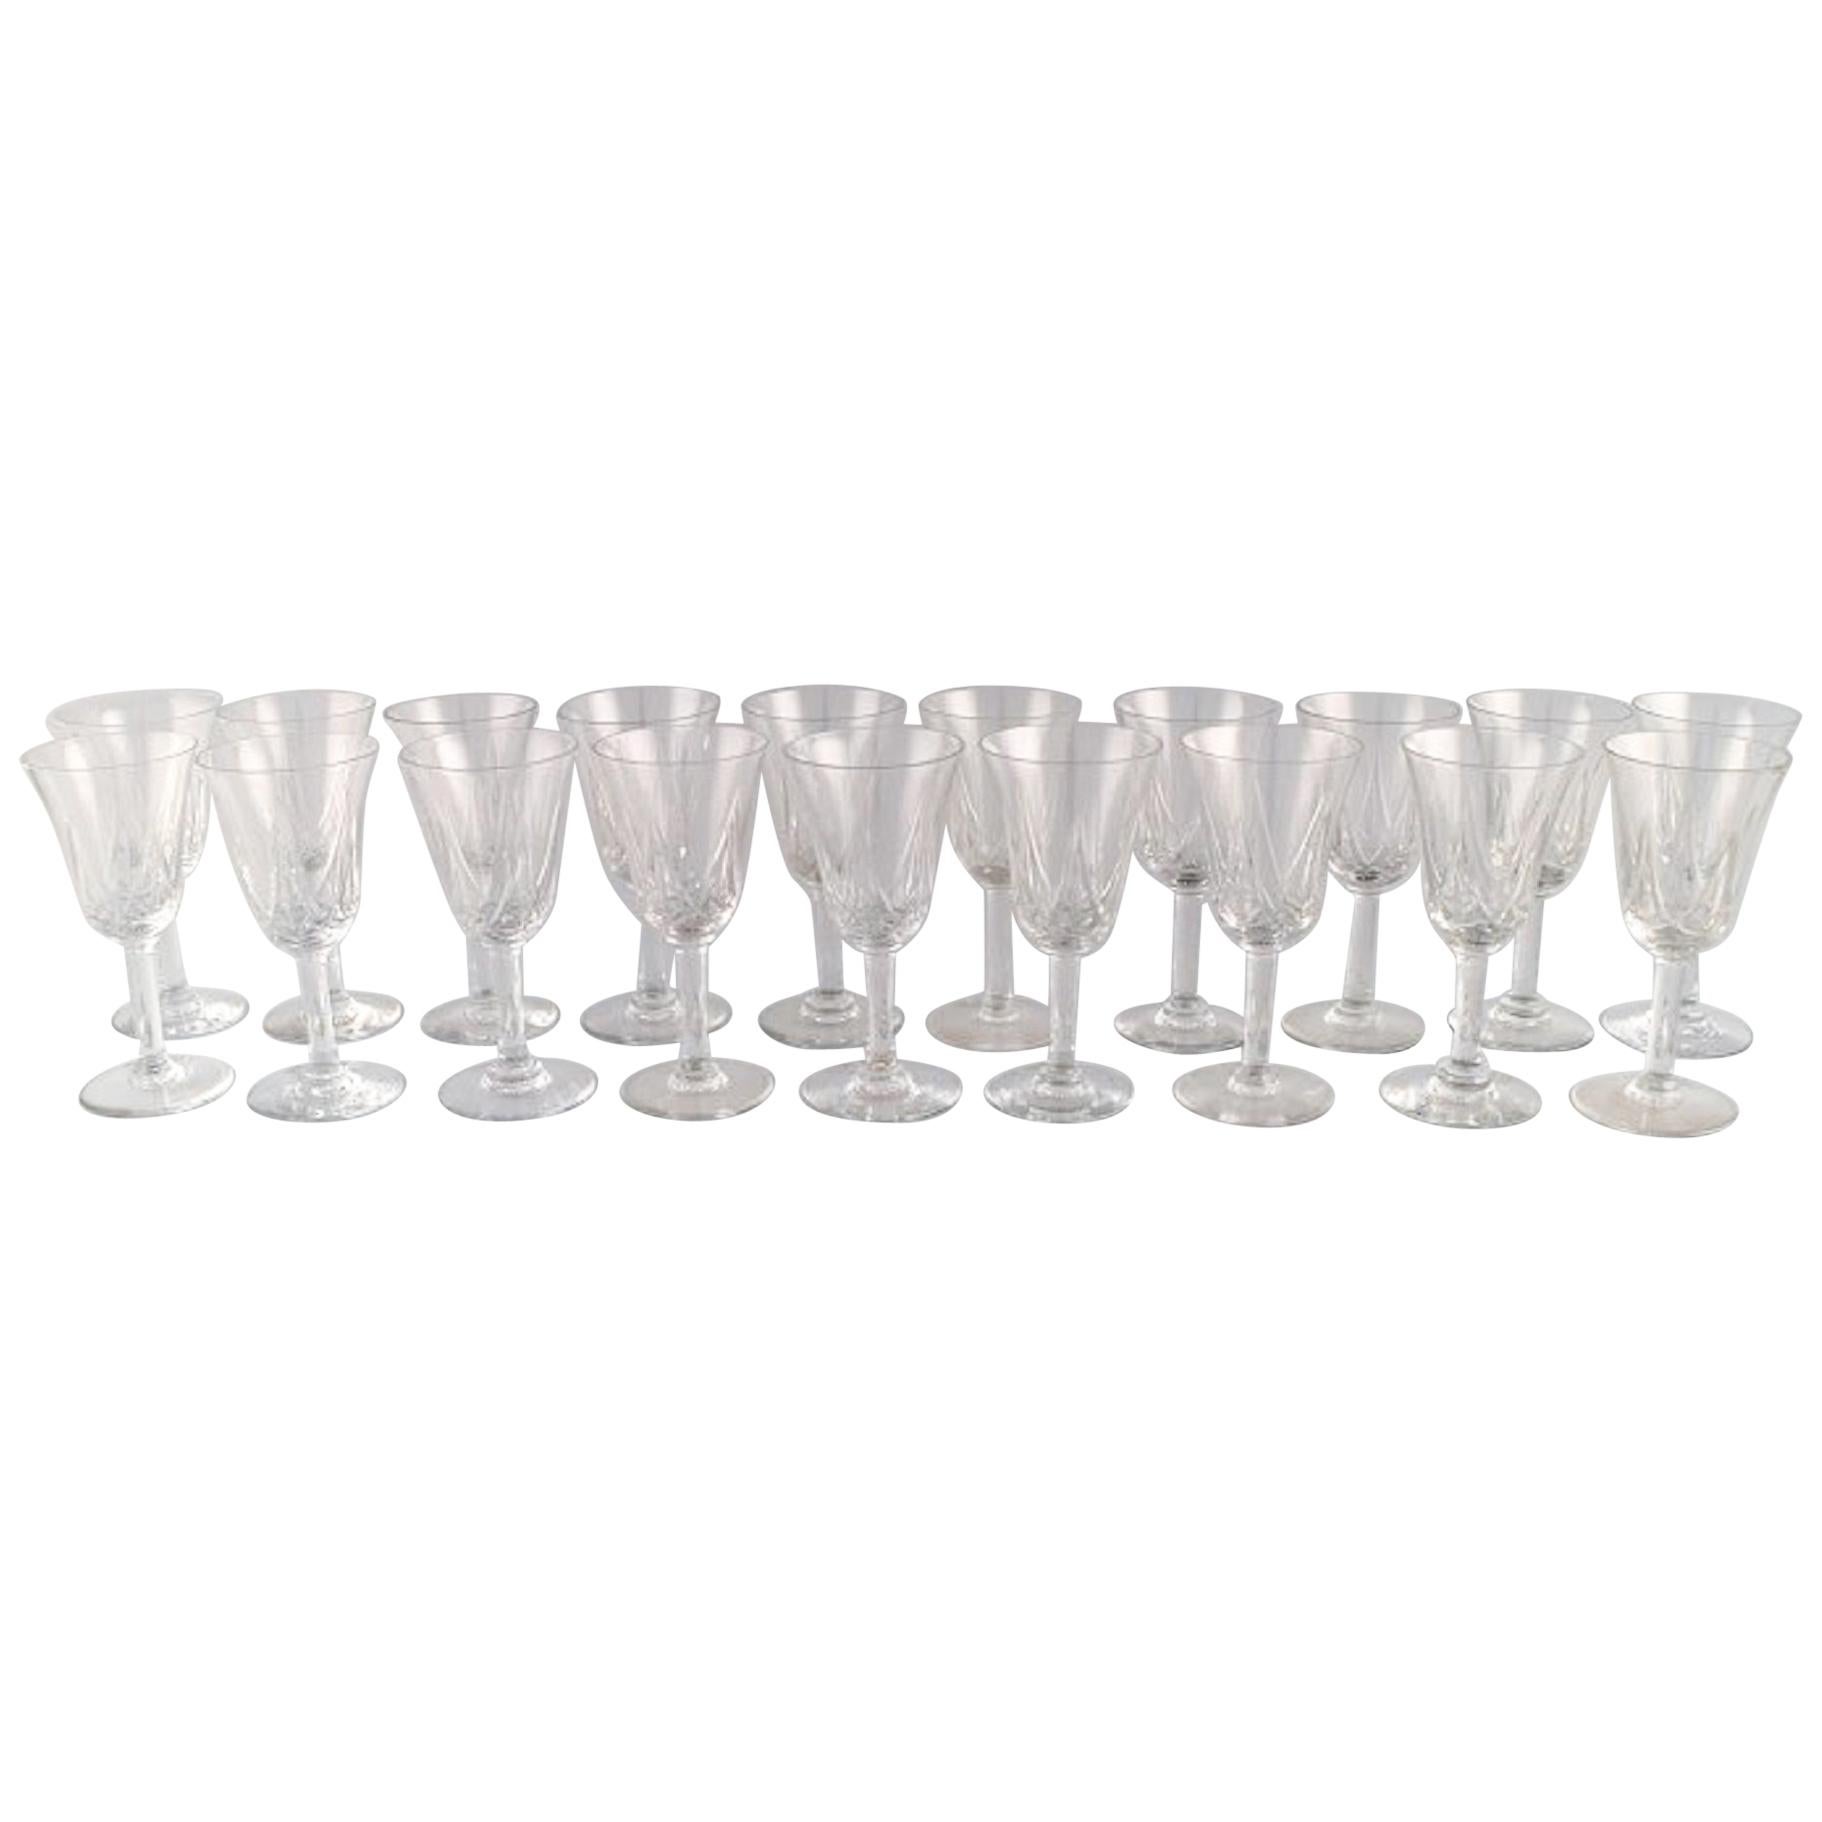 St. Louis, Belgium, 19 Glasses in Mouth Blown Crystal Glass, 1930s-1940s